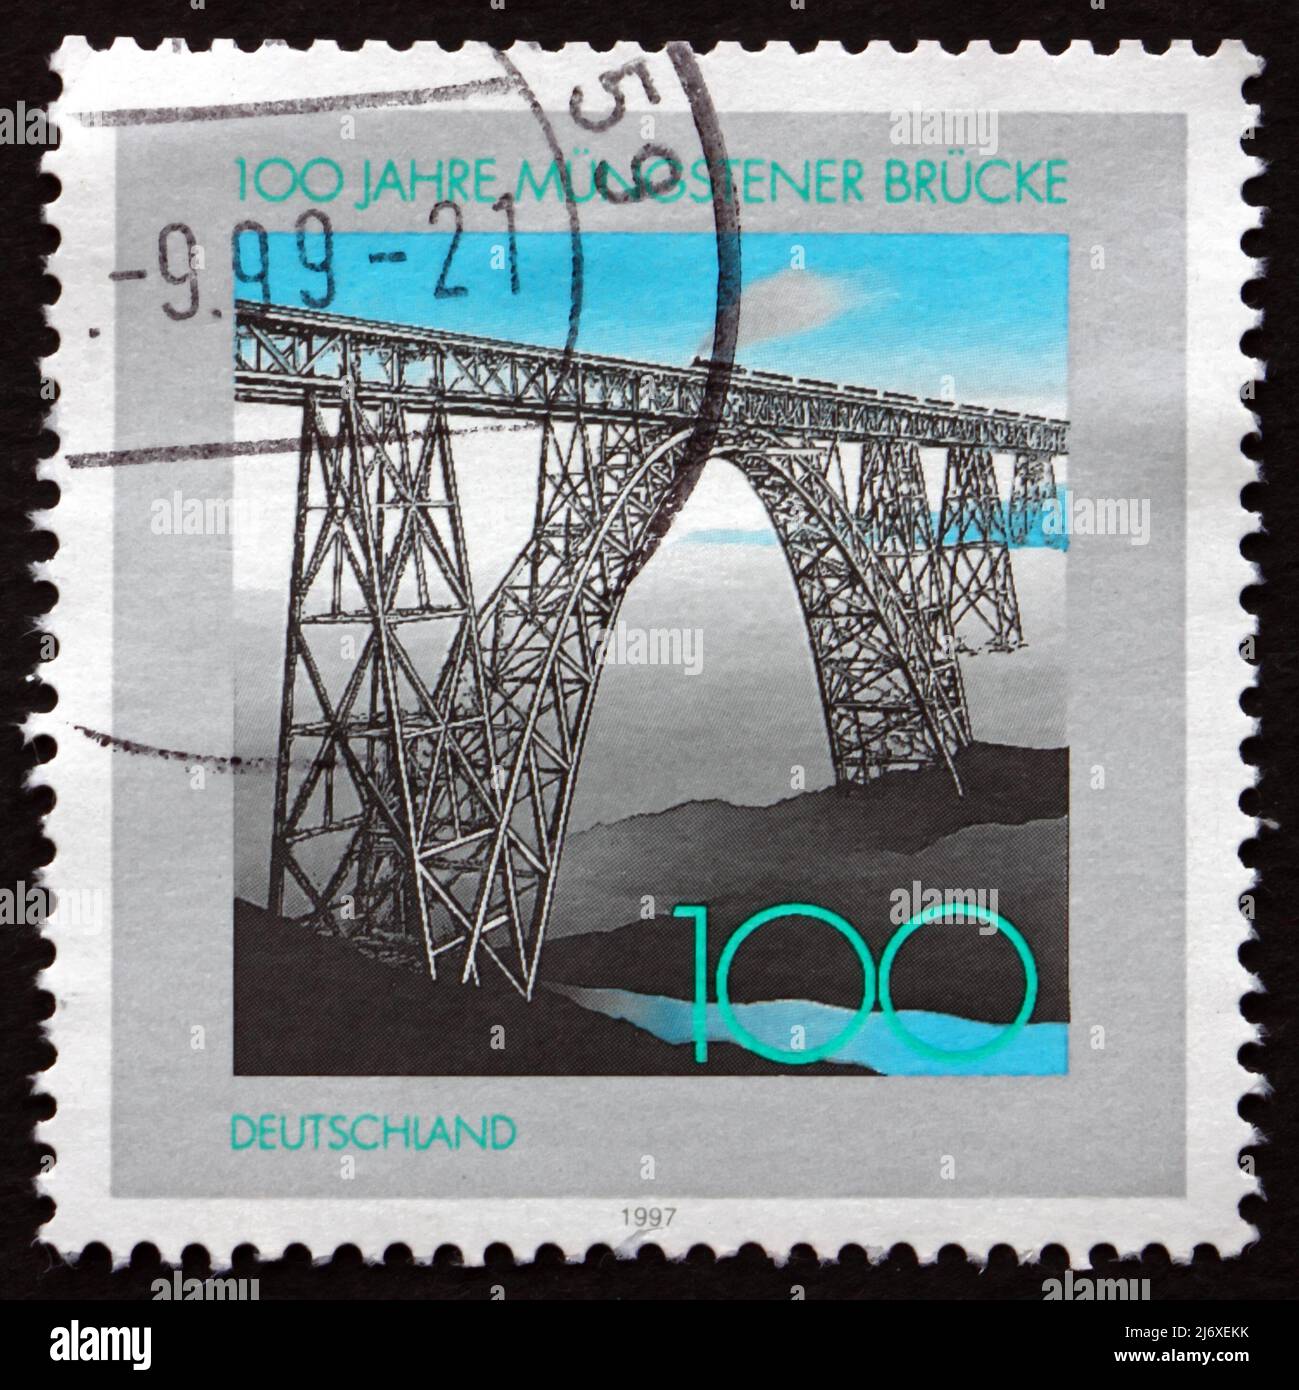 GERMANY - CIRCA 1997: a stamp printed in the Germany shows Mungsten Bridge, is the highest Railroad Bridge in Germany, Centenary, circa 1997 Stock Photo